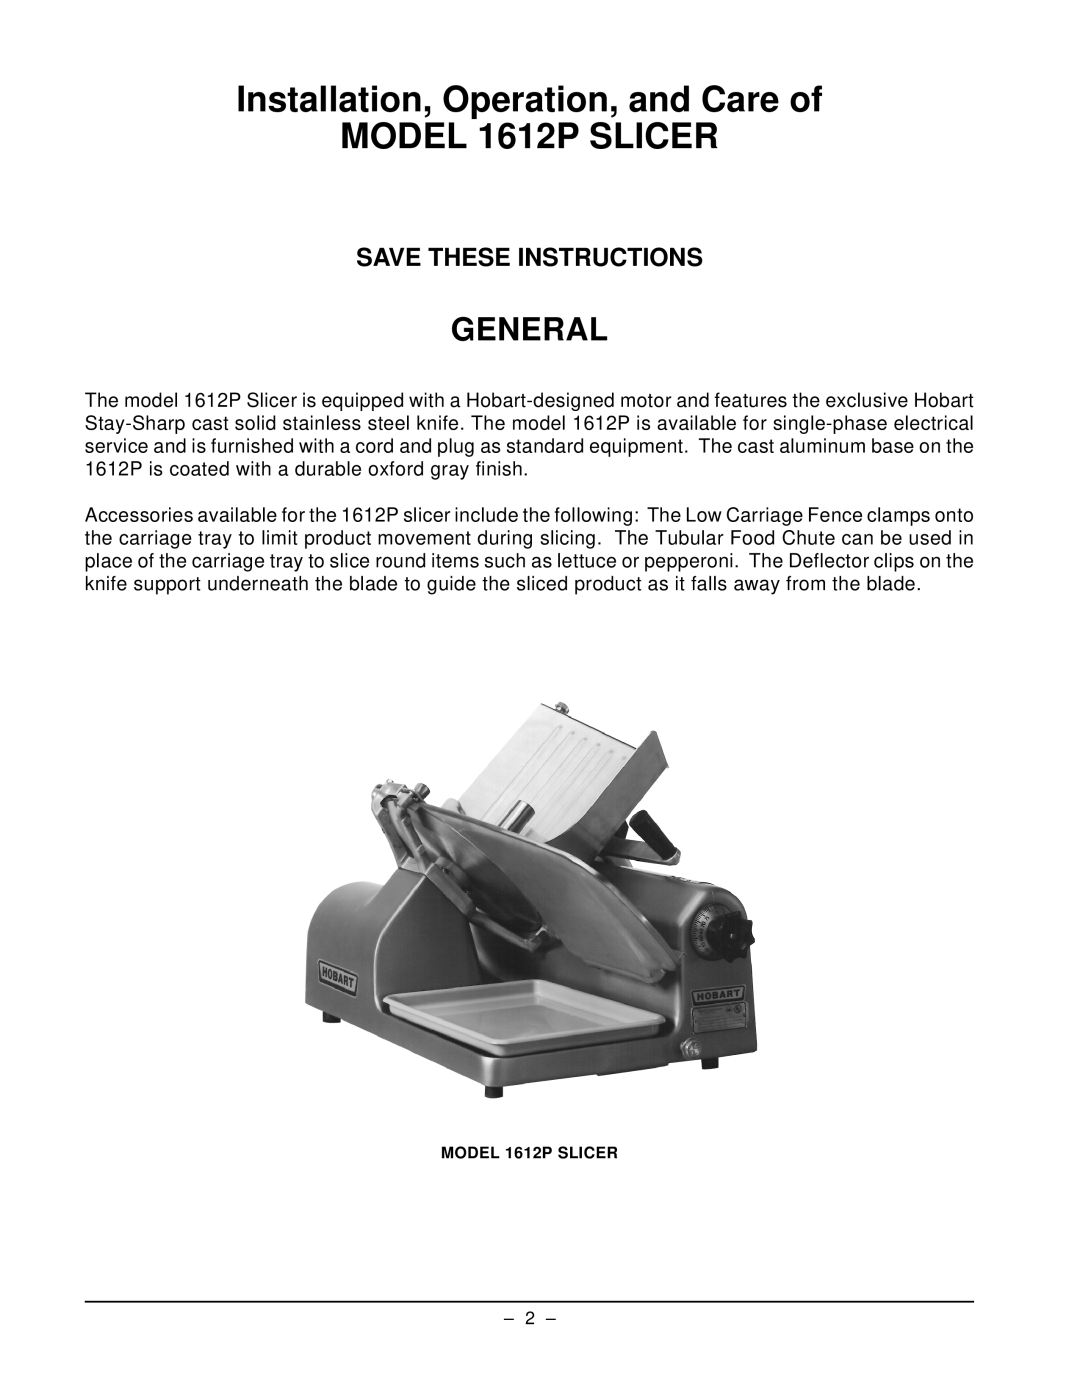 Hobart manual General, Installation, Operation, and Care of, MODEL 1612P SLICER, Save These Instructions 